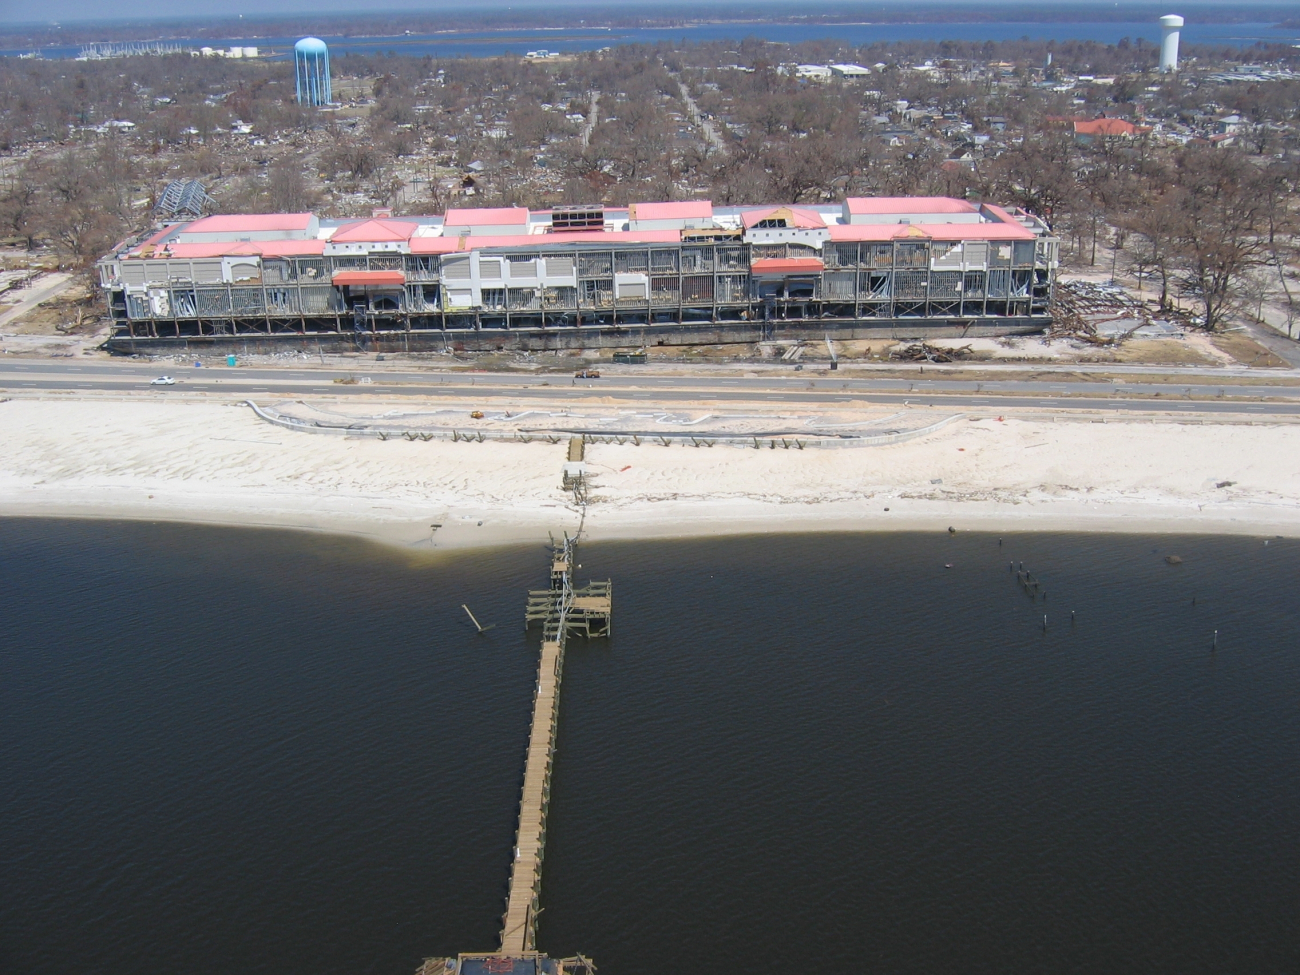 Largest of two barges from Biloxi Grand Hotel aground across Highway 90